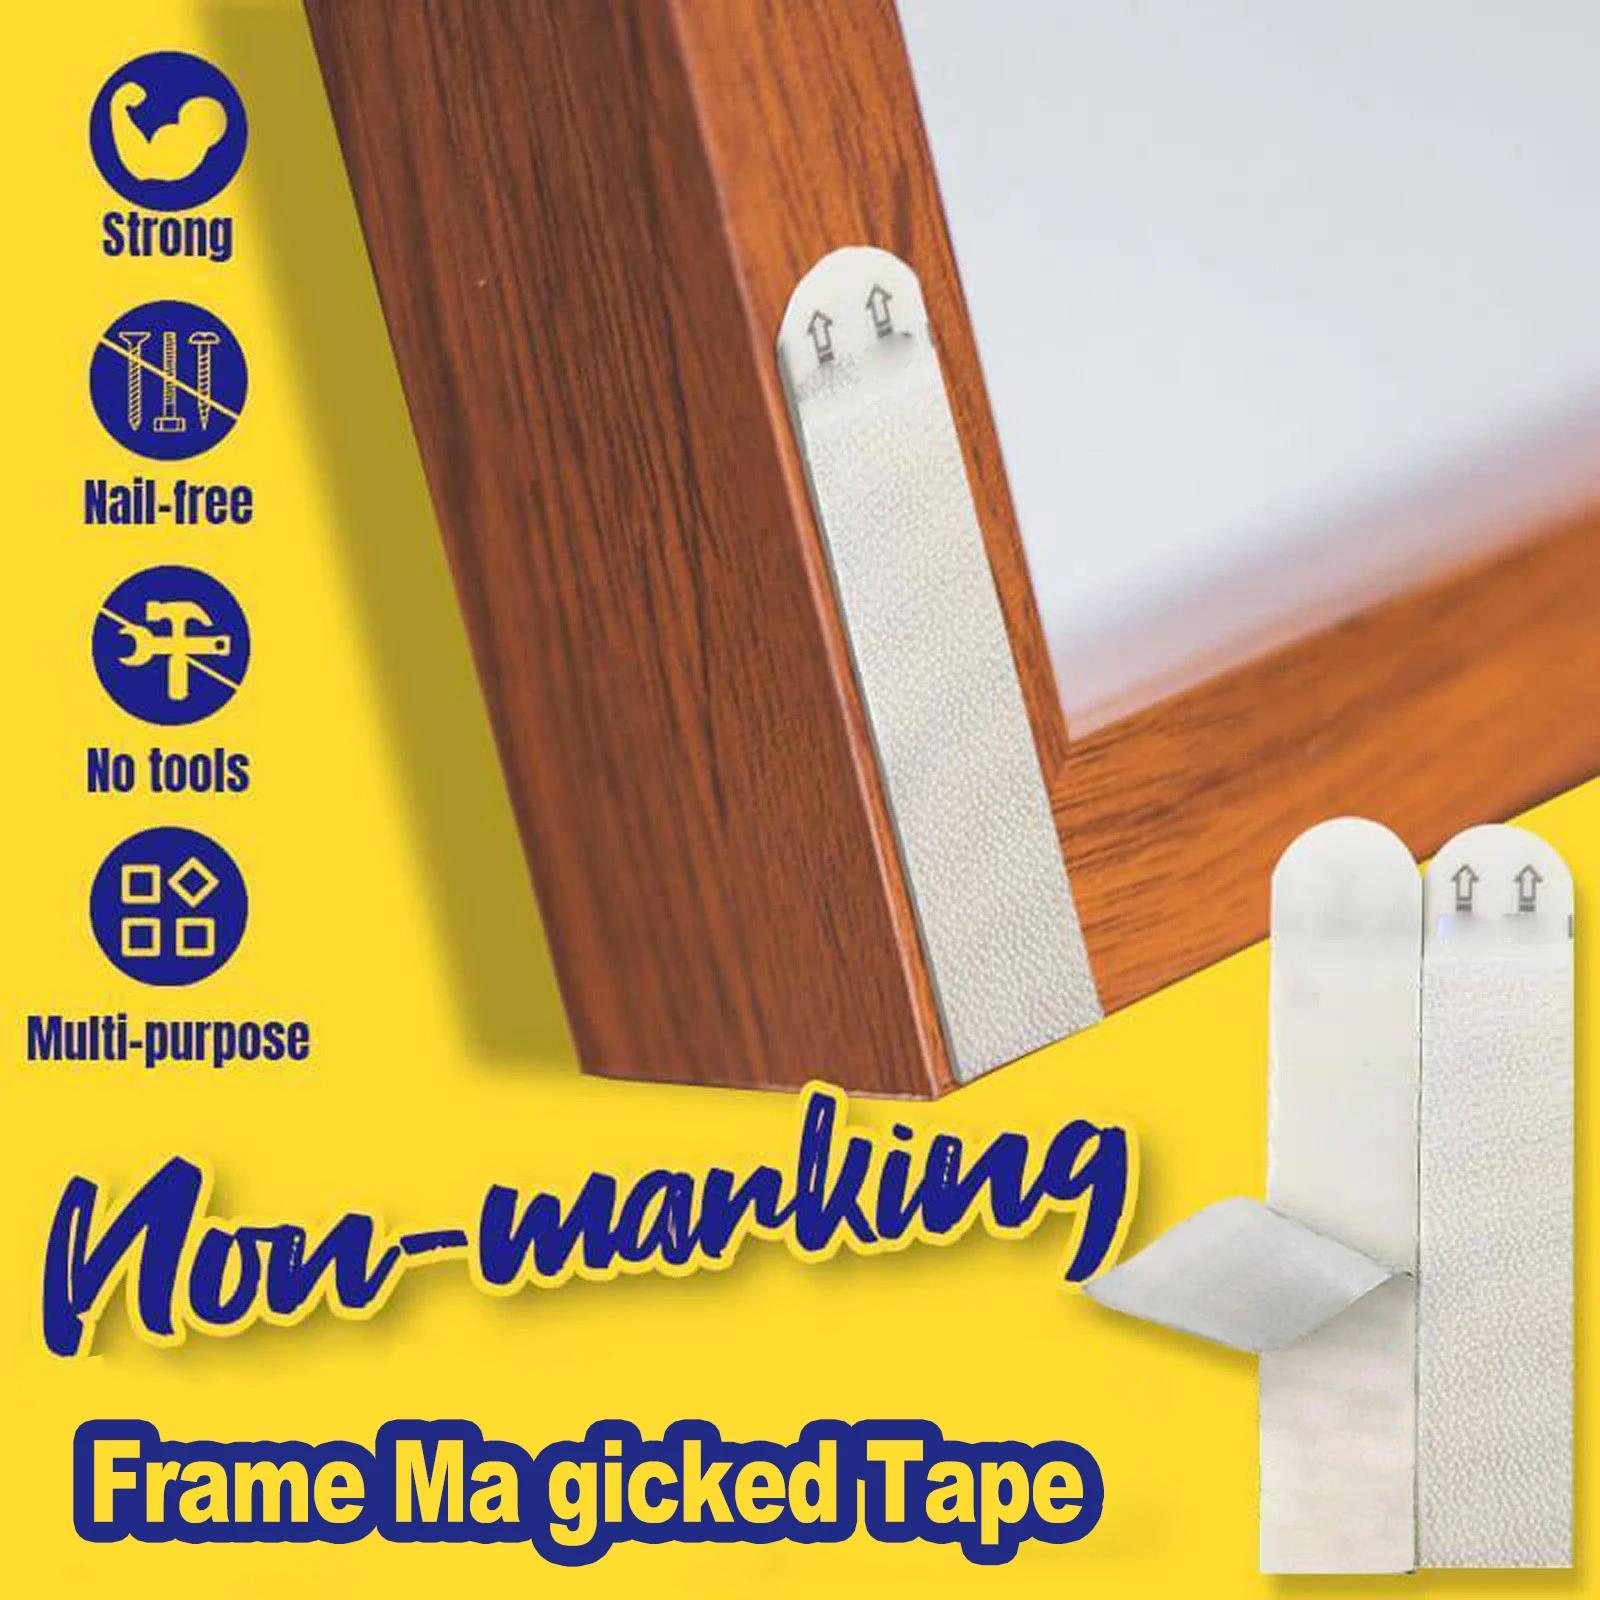 Non-marking Ma gicked Tape Clasp Hook Multi-purpose Wall Hooks Hanging for Picture Frame Poster Hanging Strip Home D